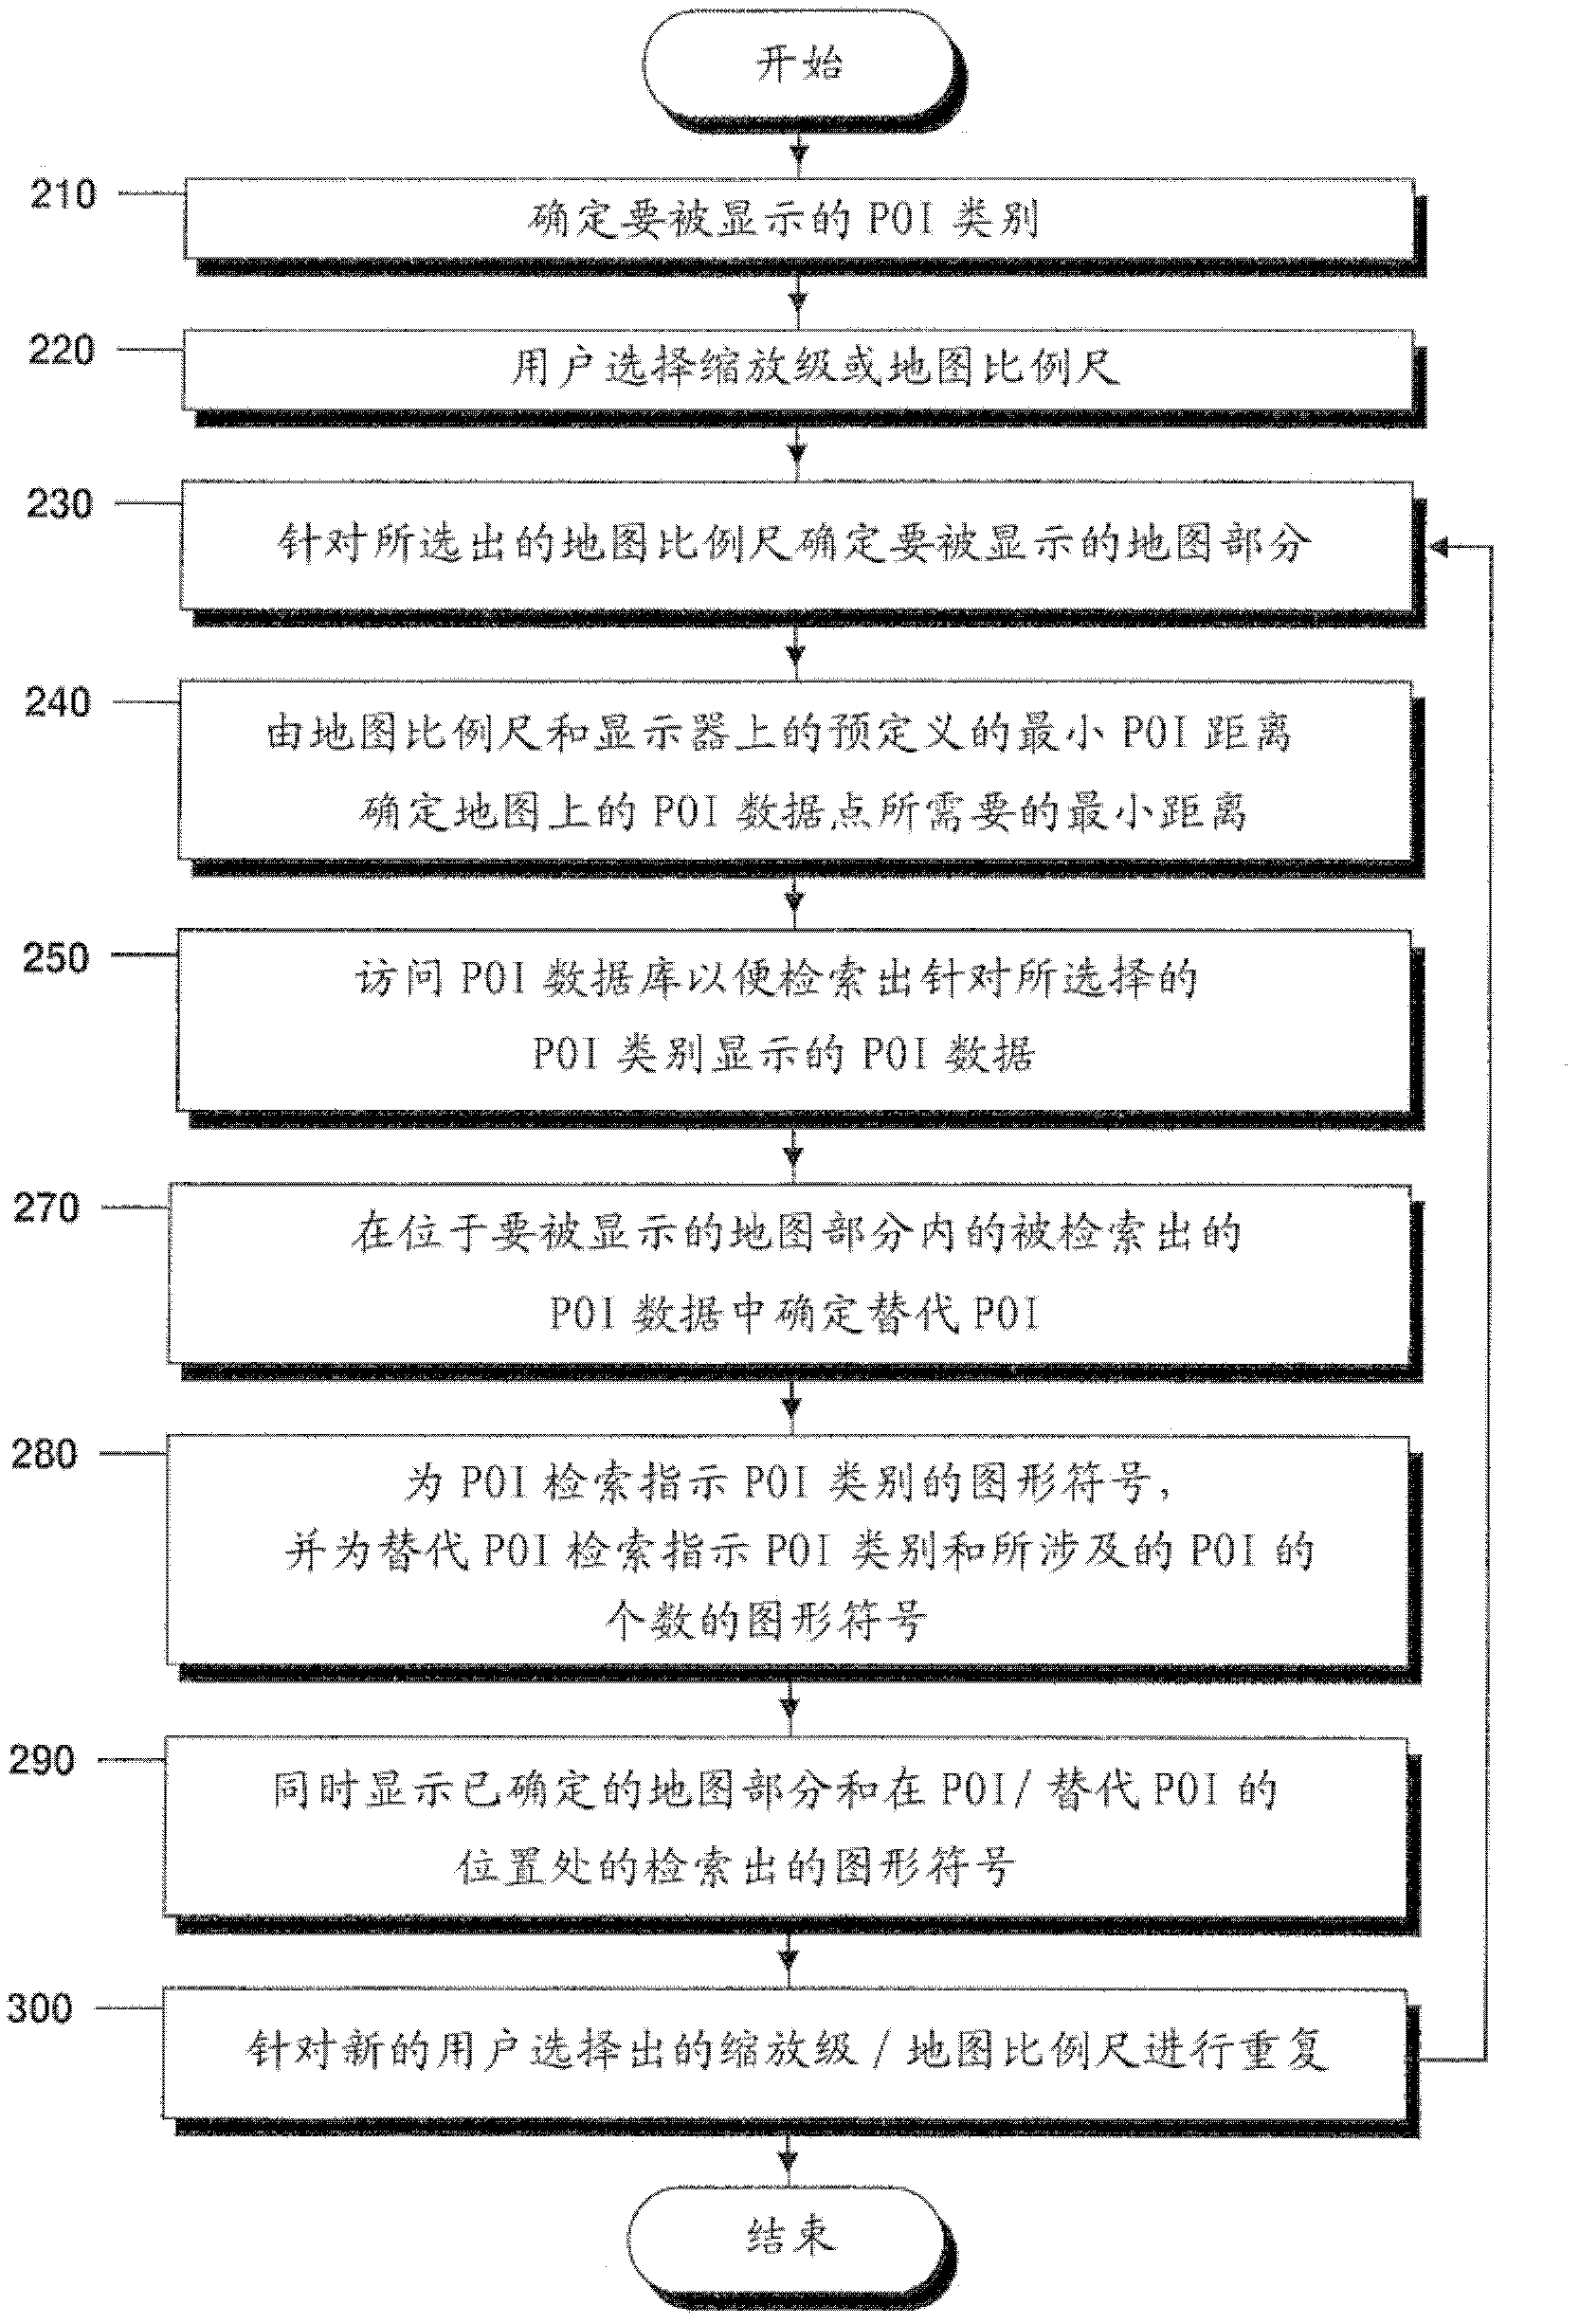 System for displaying points of interest